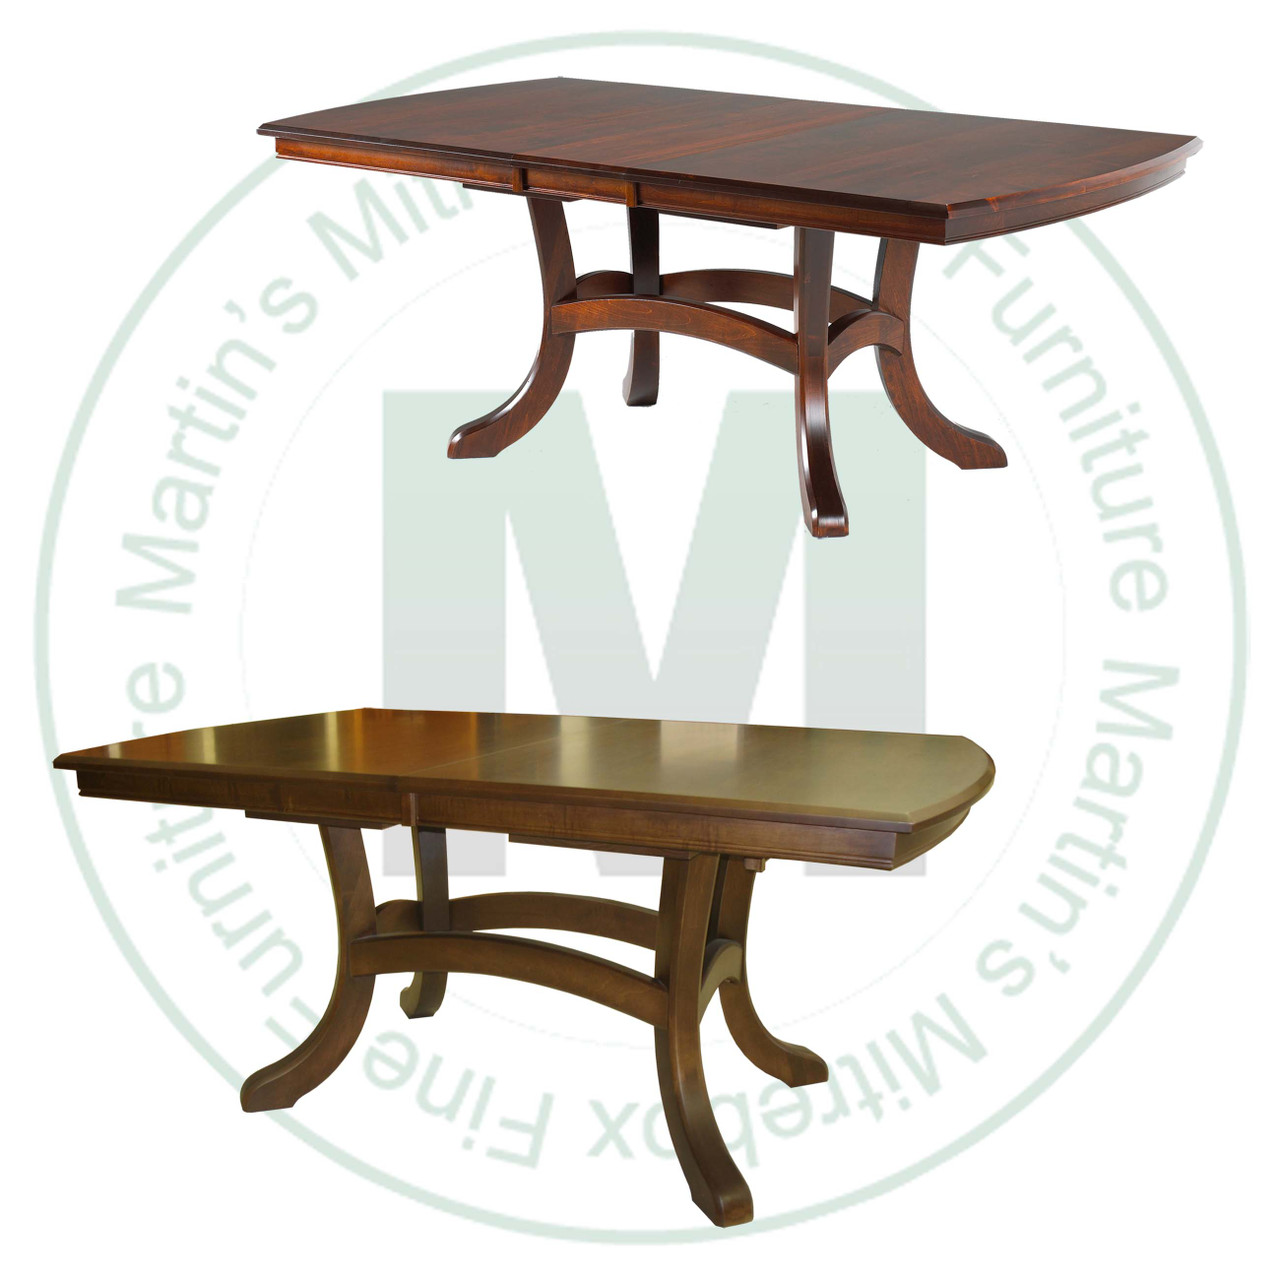 Maple Jordan Double Pedestal Table 54''D x 96''W x 30''H With 2 - 12'' Leaves. Table Has 1'' Thick Top